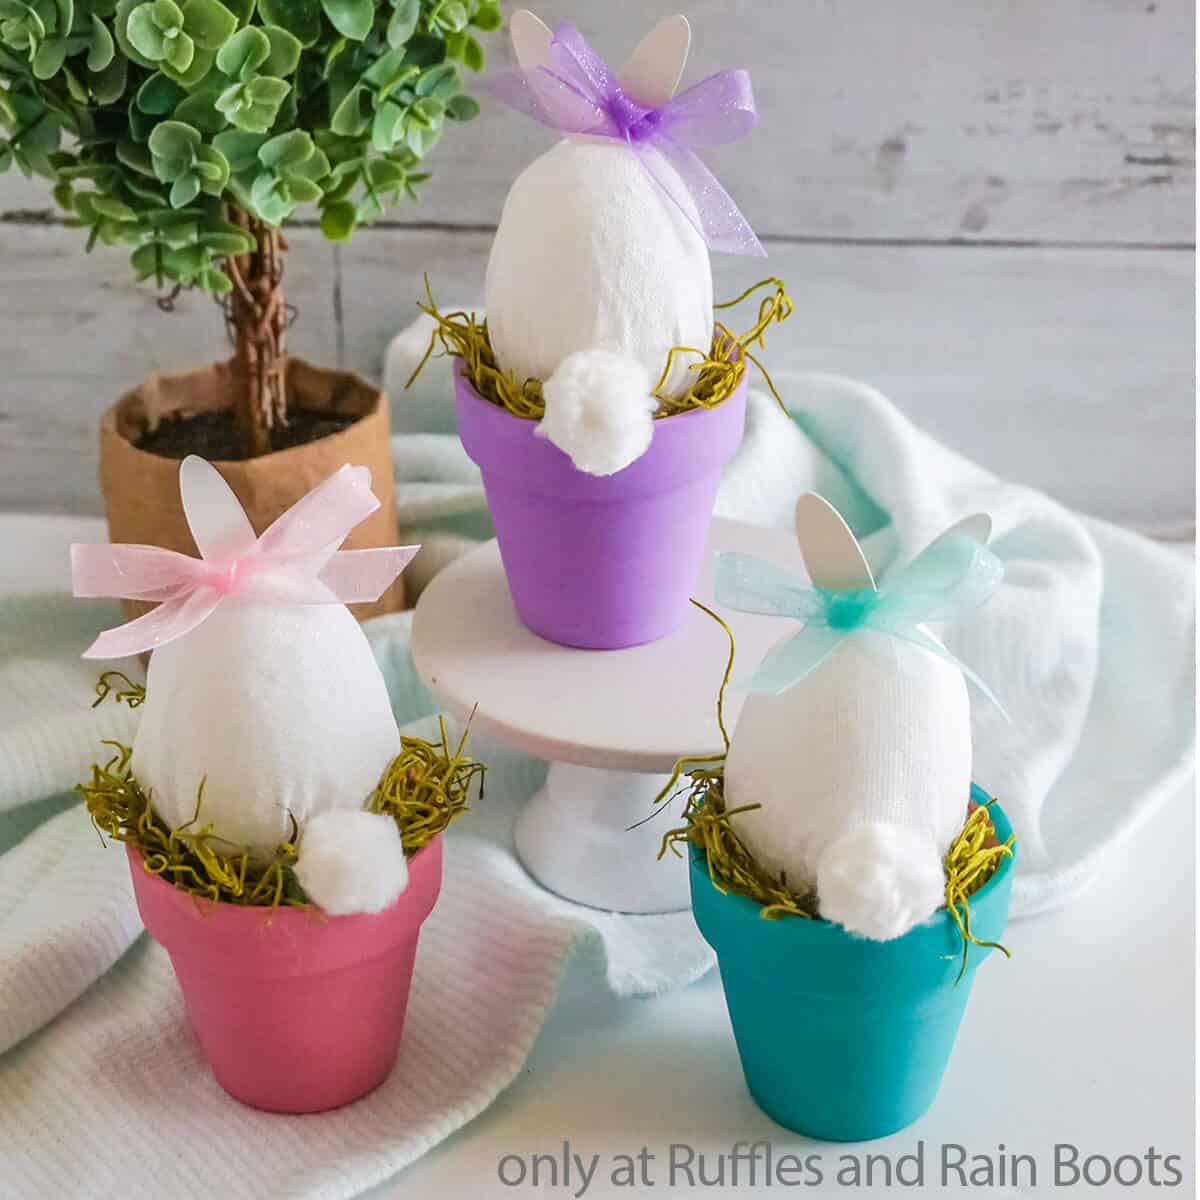 Square image of three bunny in a pot easter crafts painted pink blue and purple staged on a white table with a miniature tree in a rustic paper bag pot.